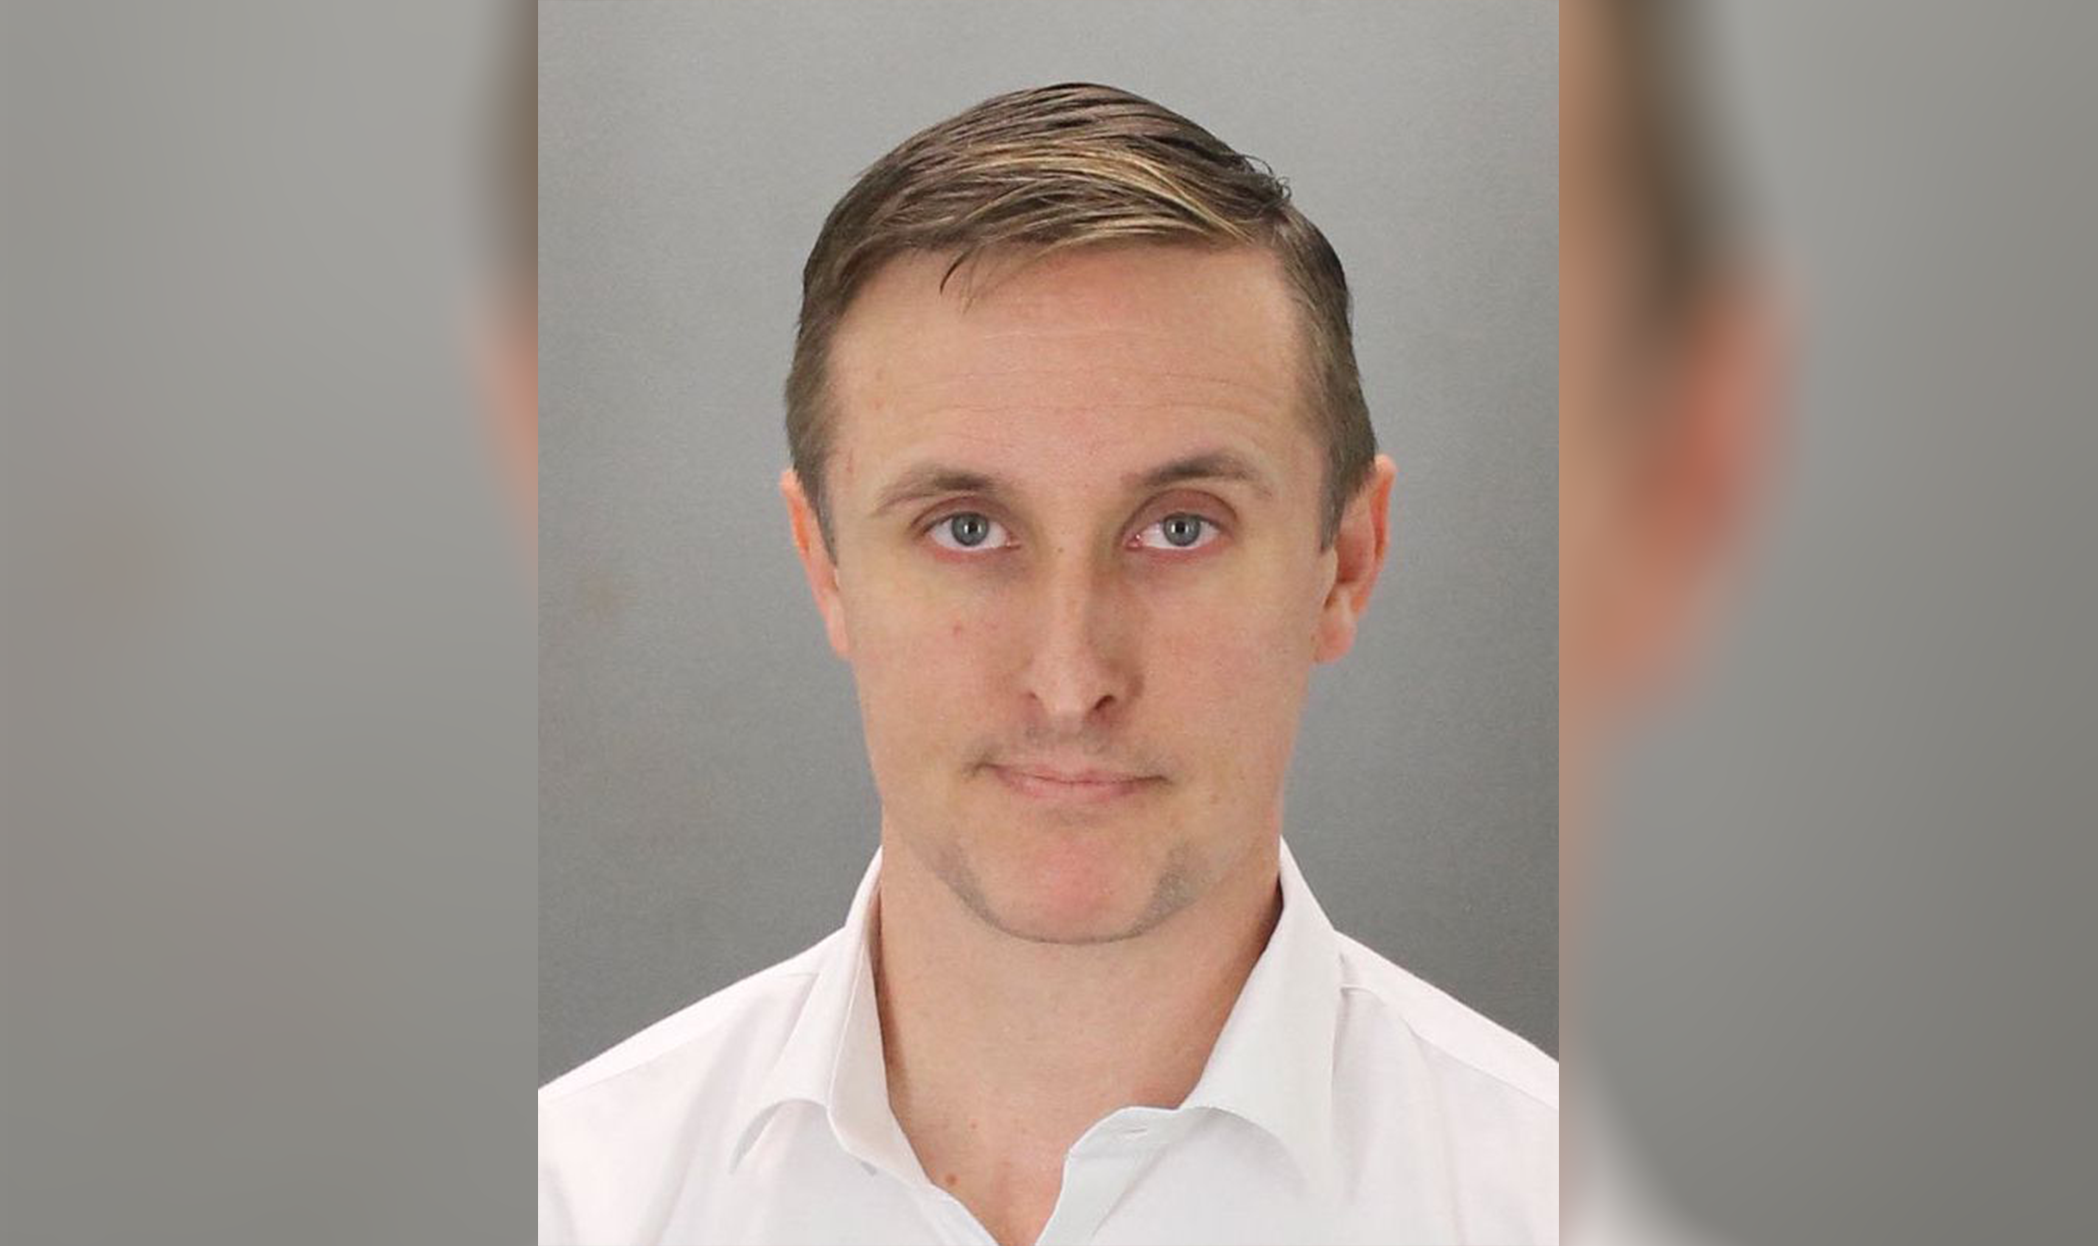 Stockton chiropractor accused of sexually assaulting patient